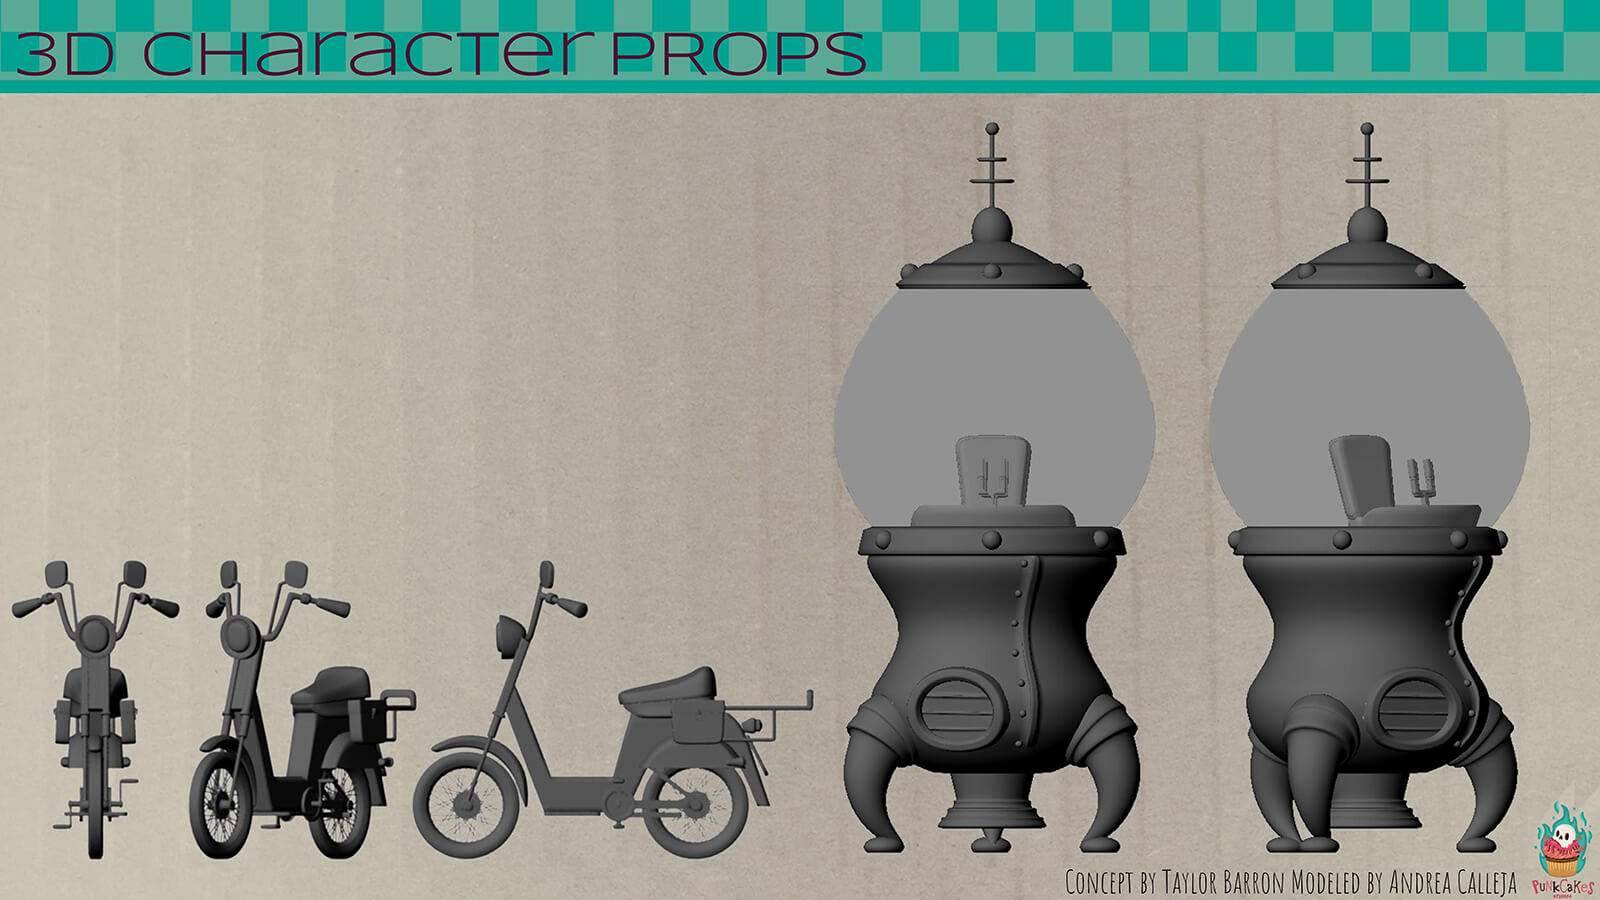 3D renders of character props, including a motor scooter and a rocket ship.